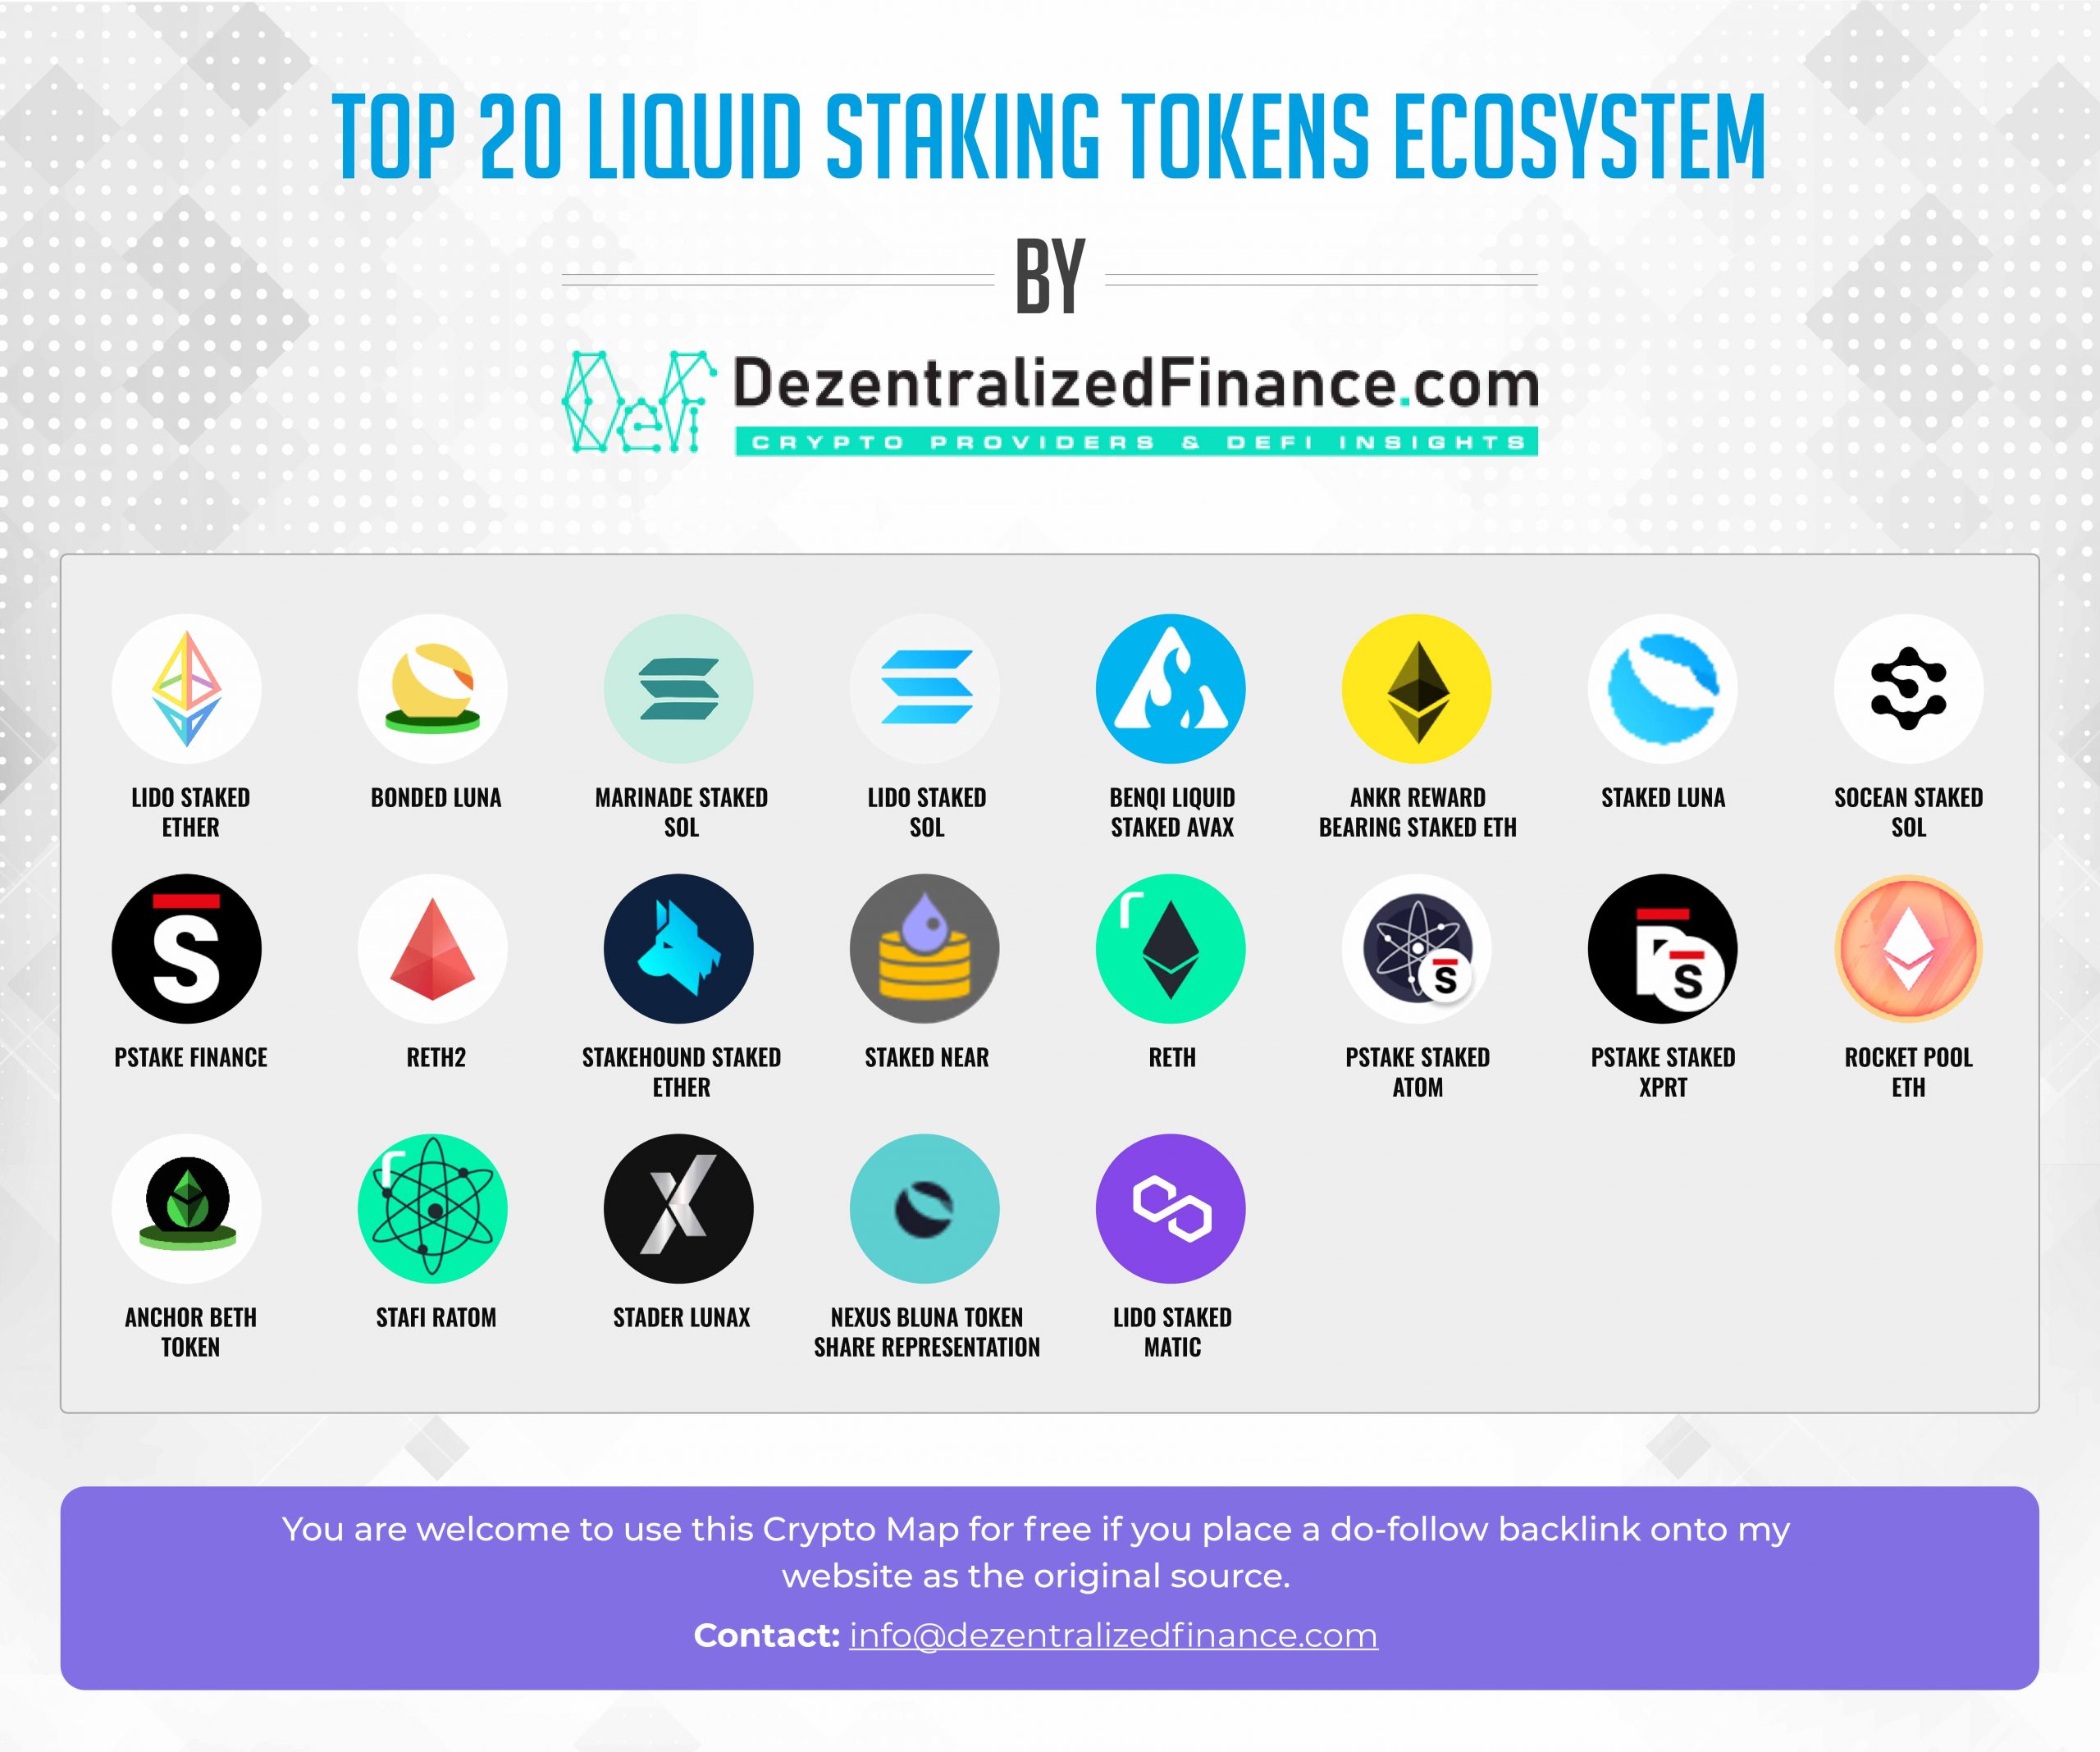 Top Liquid Staking Tokens Coins by Market Capitalization scaled